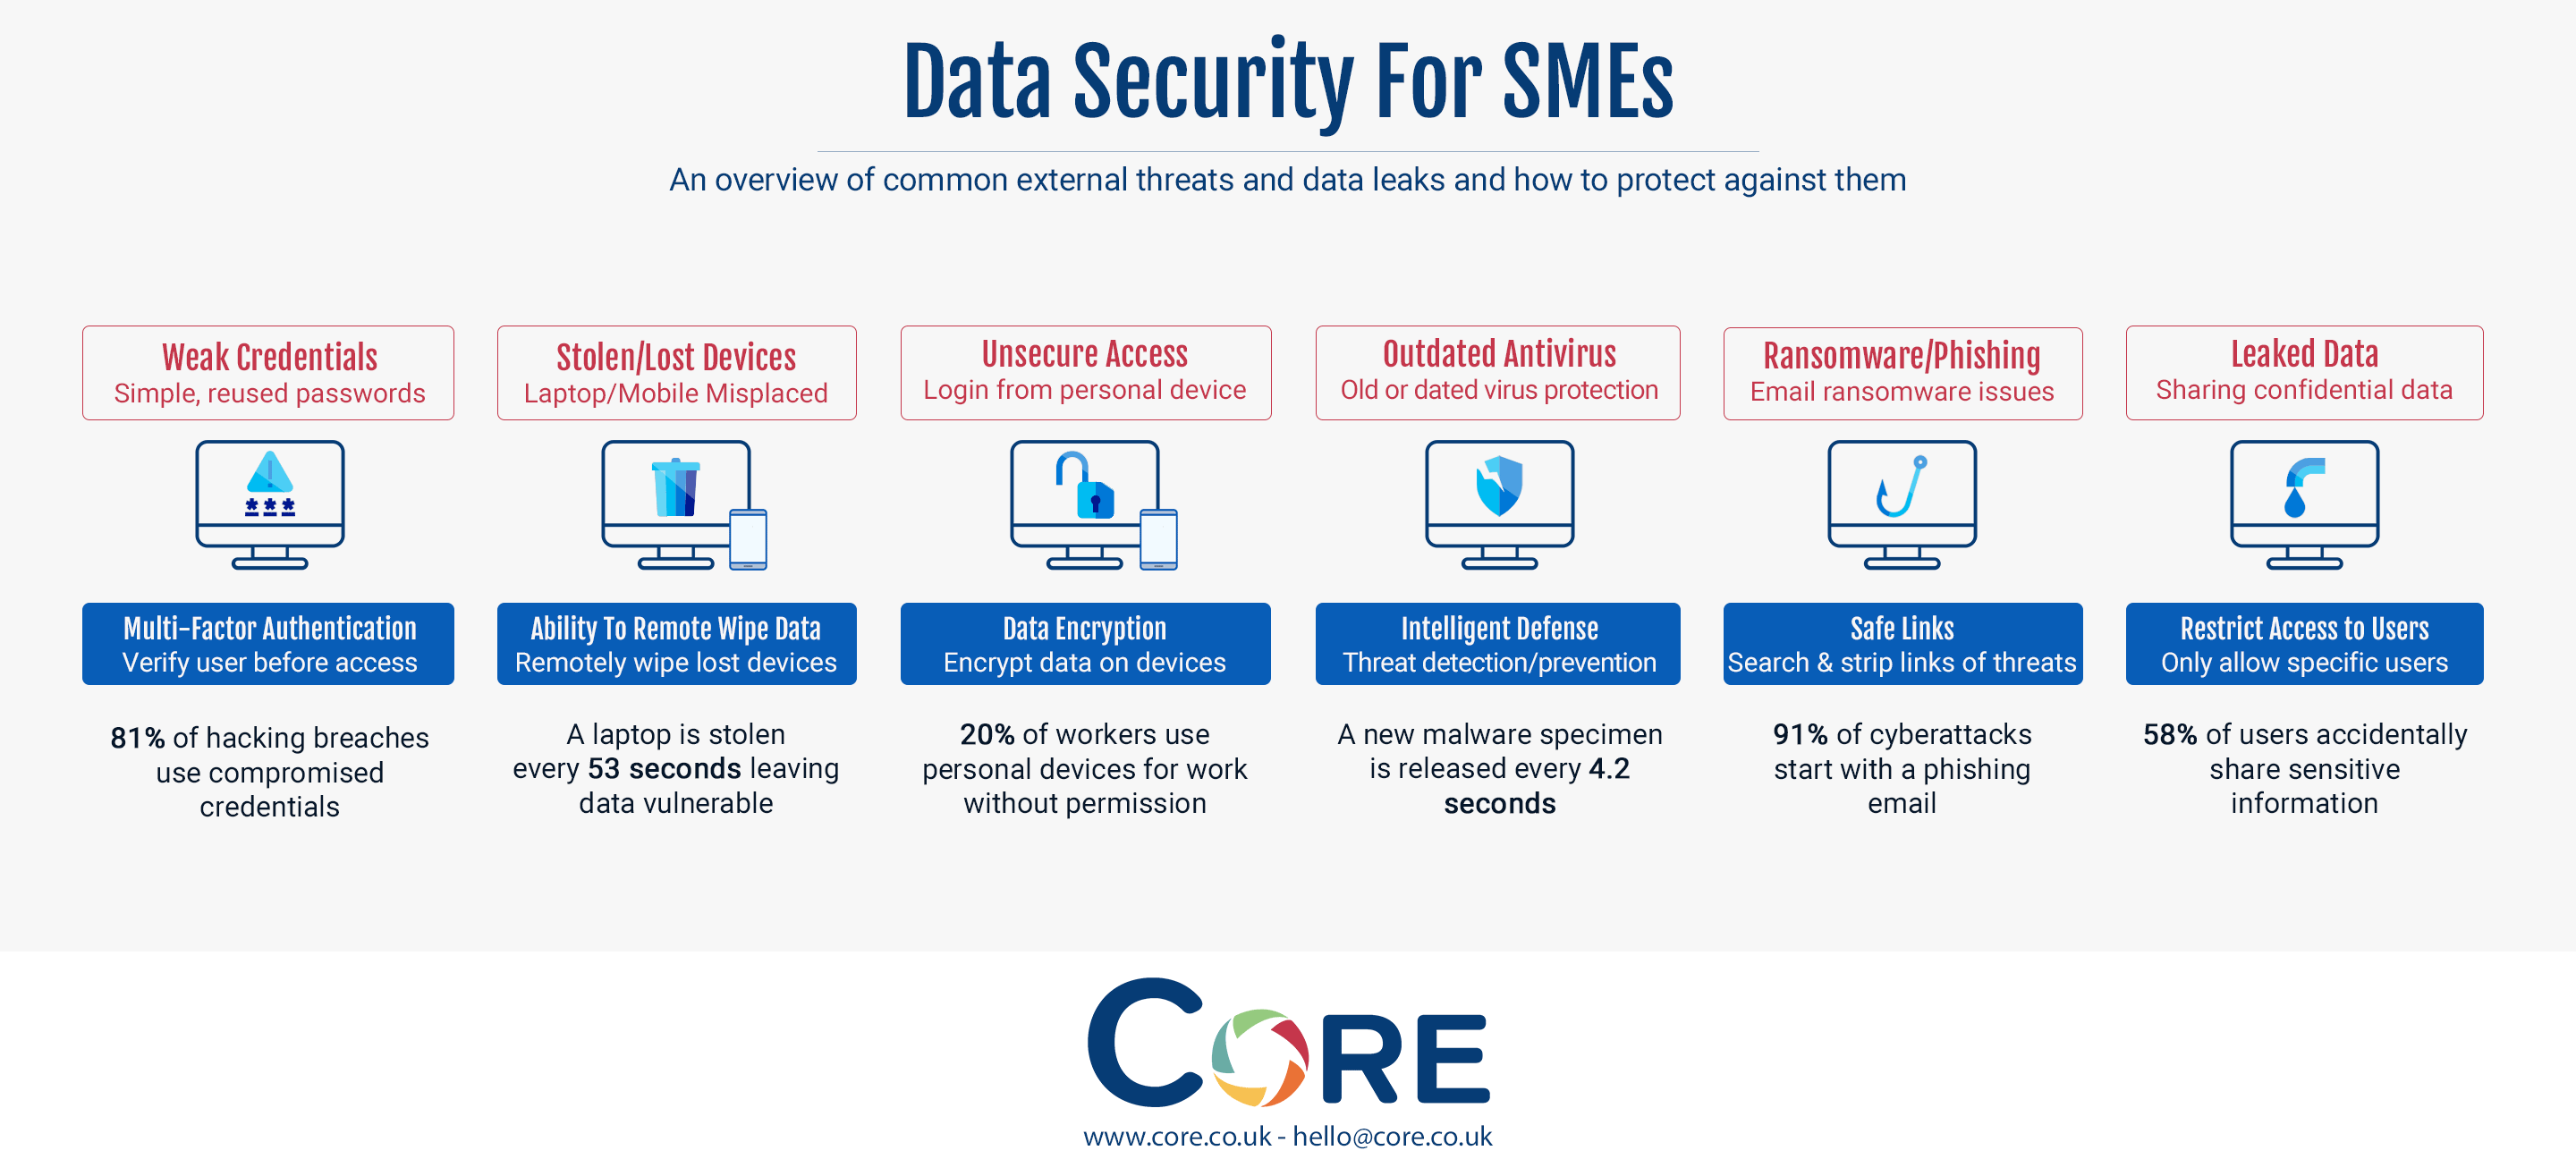 An infographic on common data security threats for SMEs and their solutions